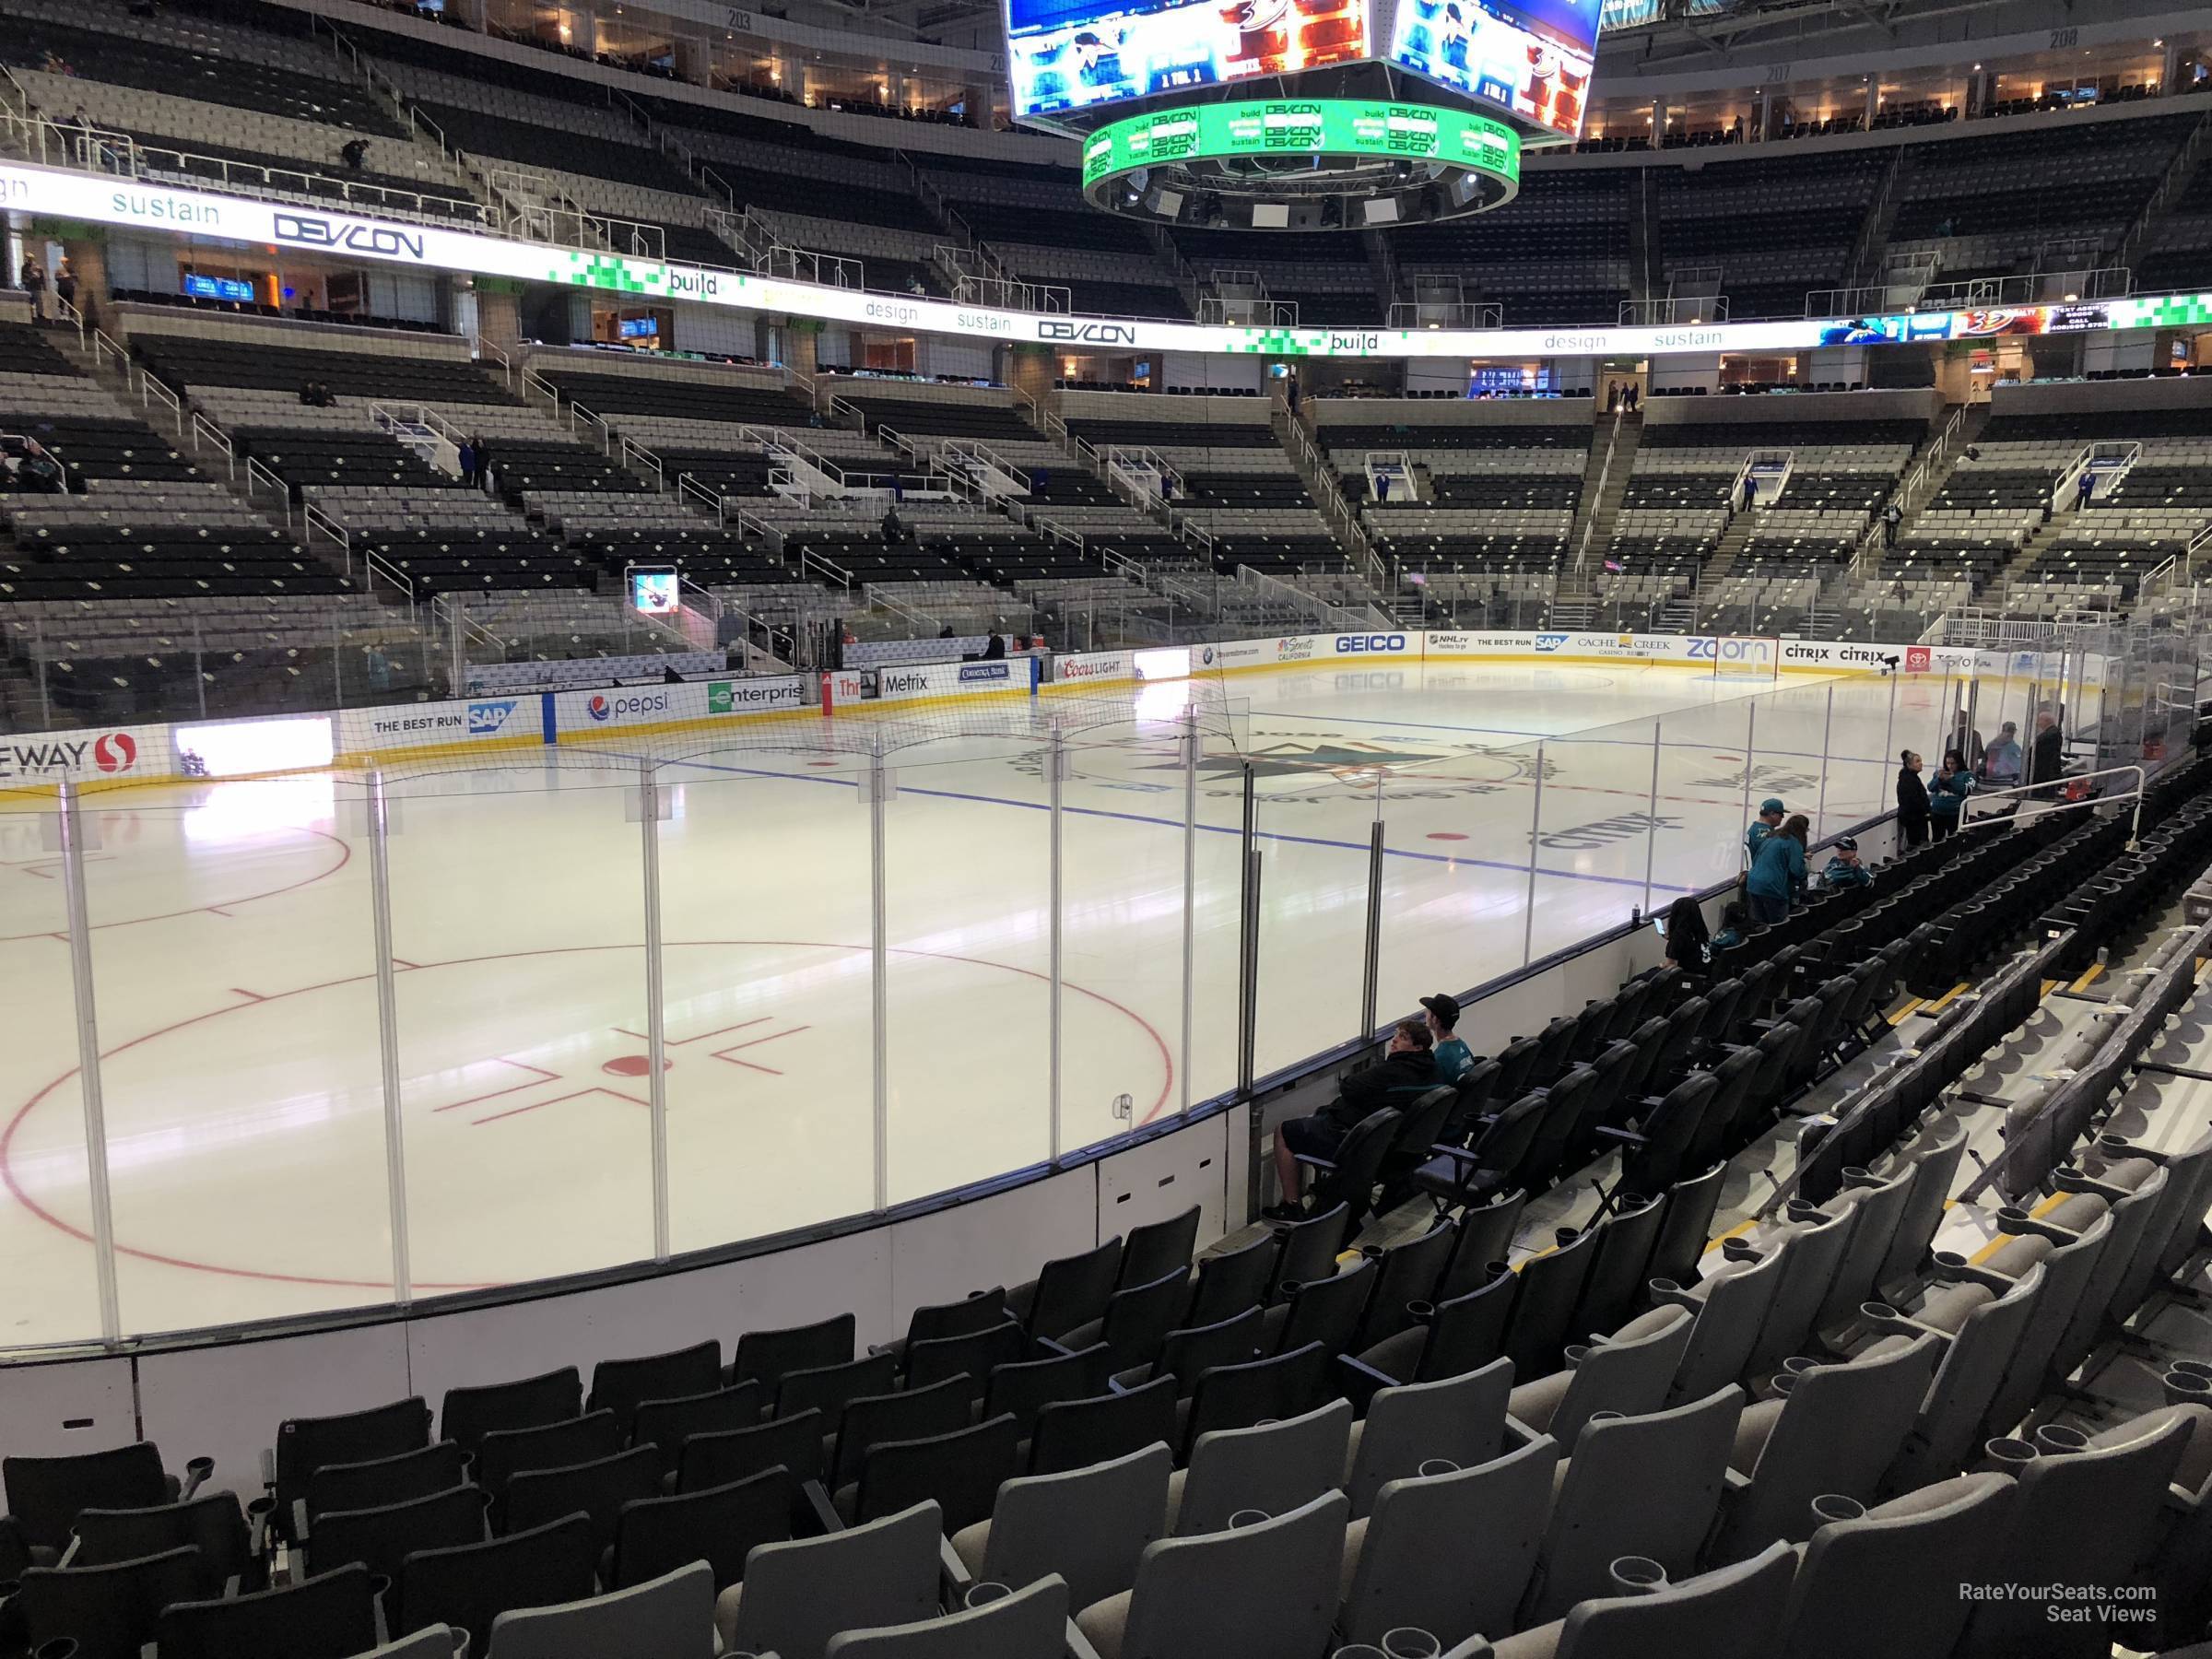 Section 118 at SAP Center